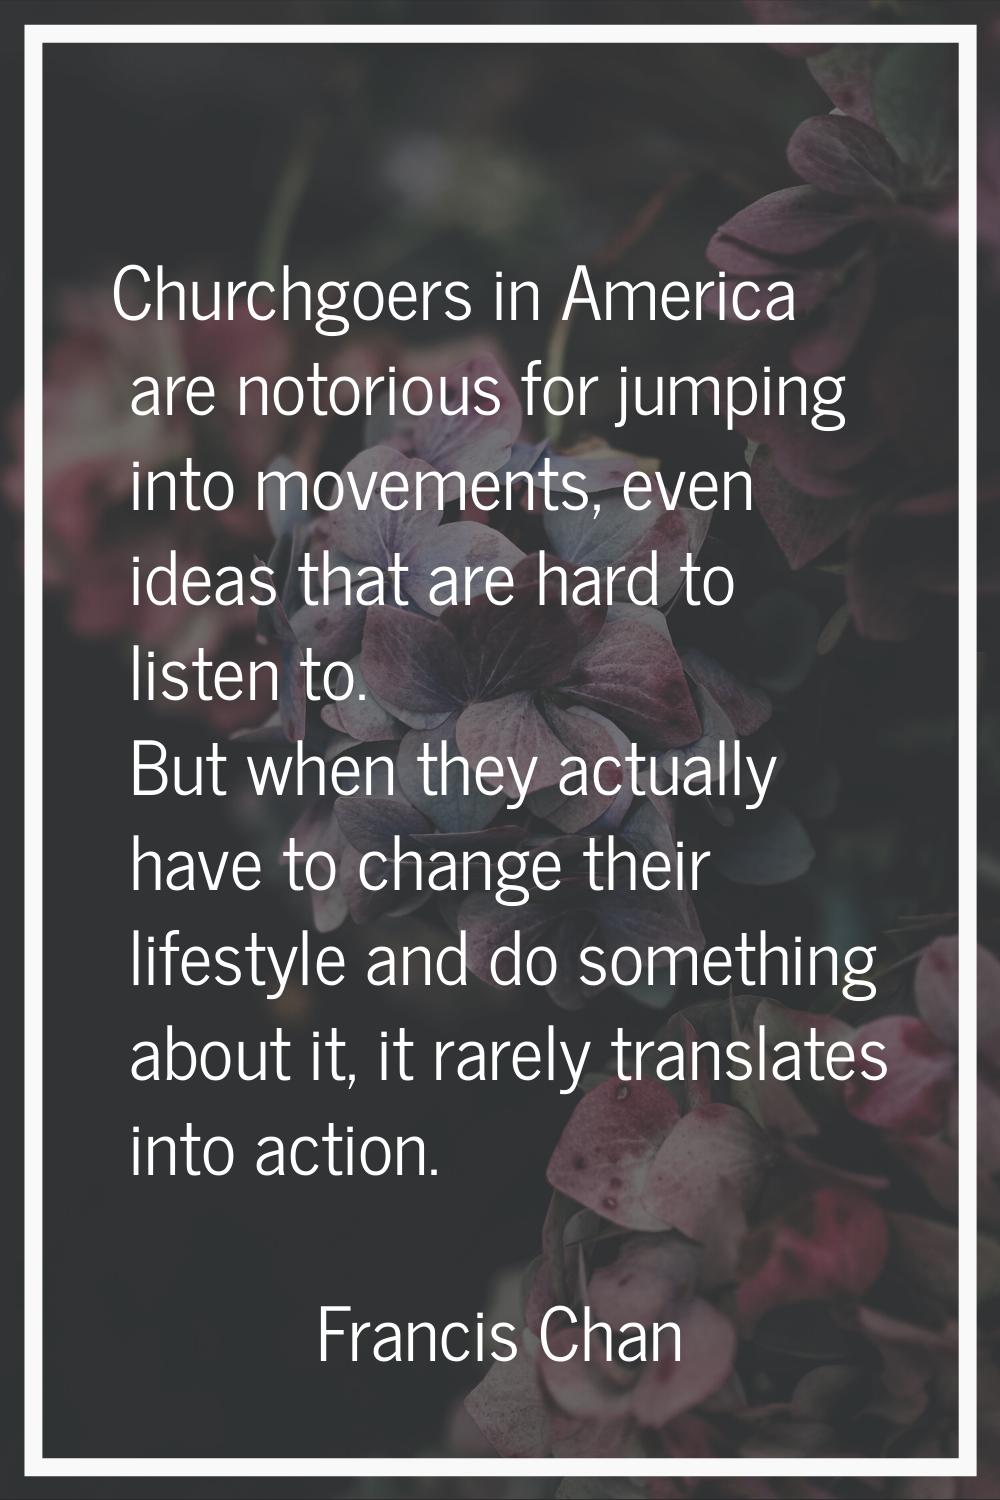 Churchgoers in America are notorious for jumping into movements, even ideas that are hard to listen